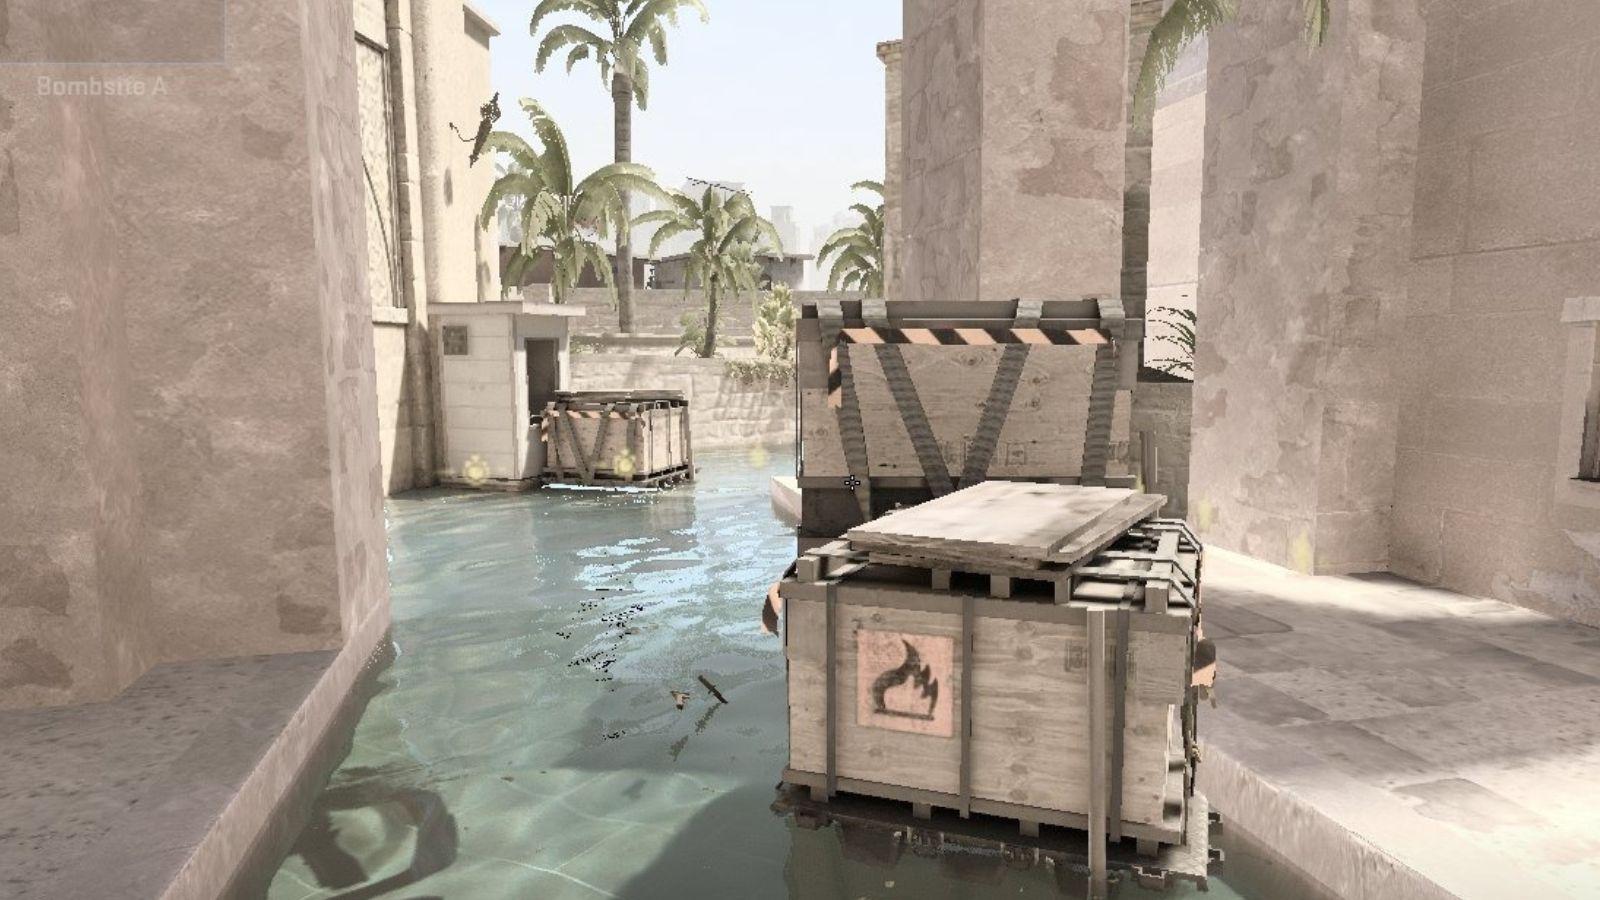 Counter-Strike 2 map issue